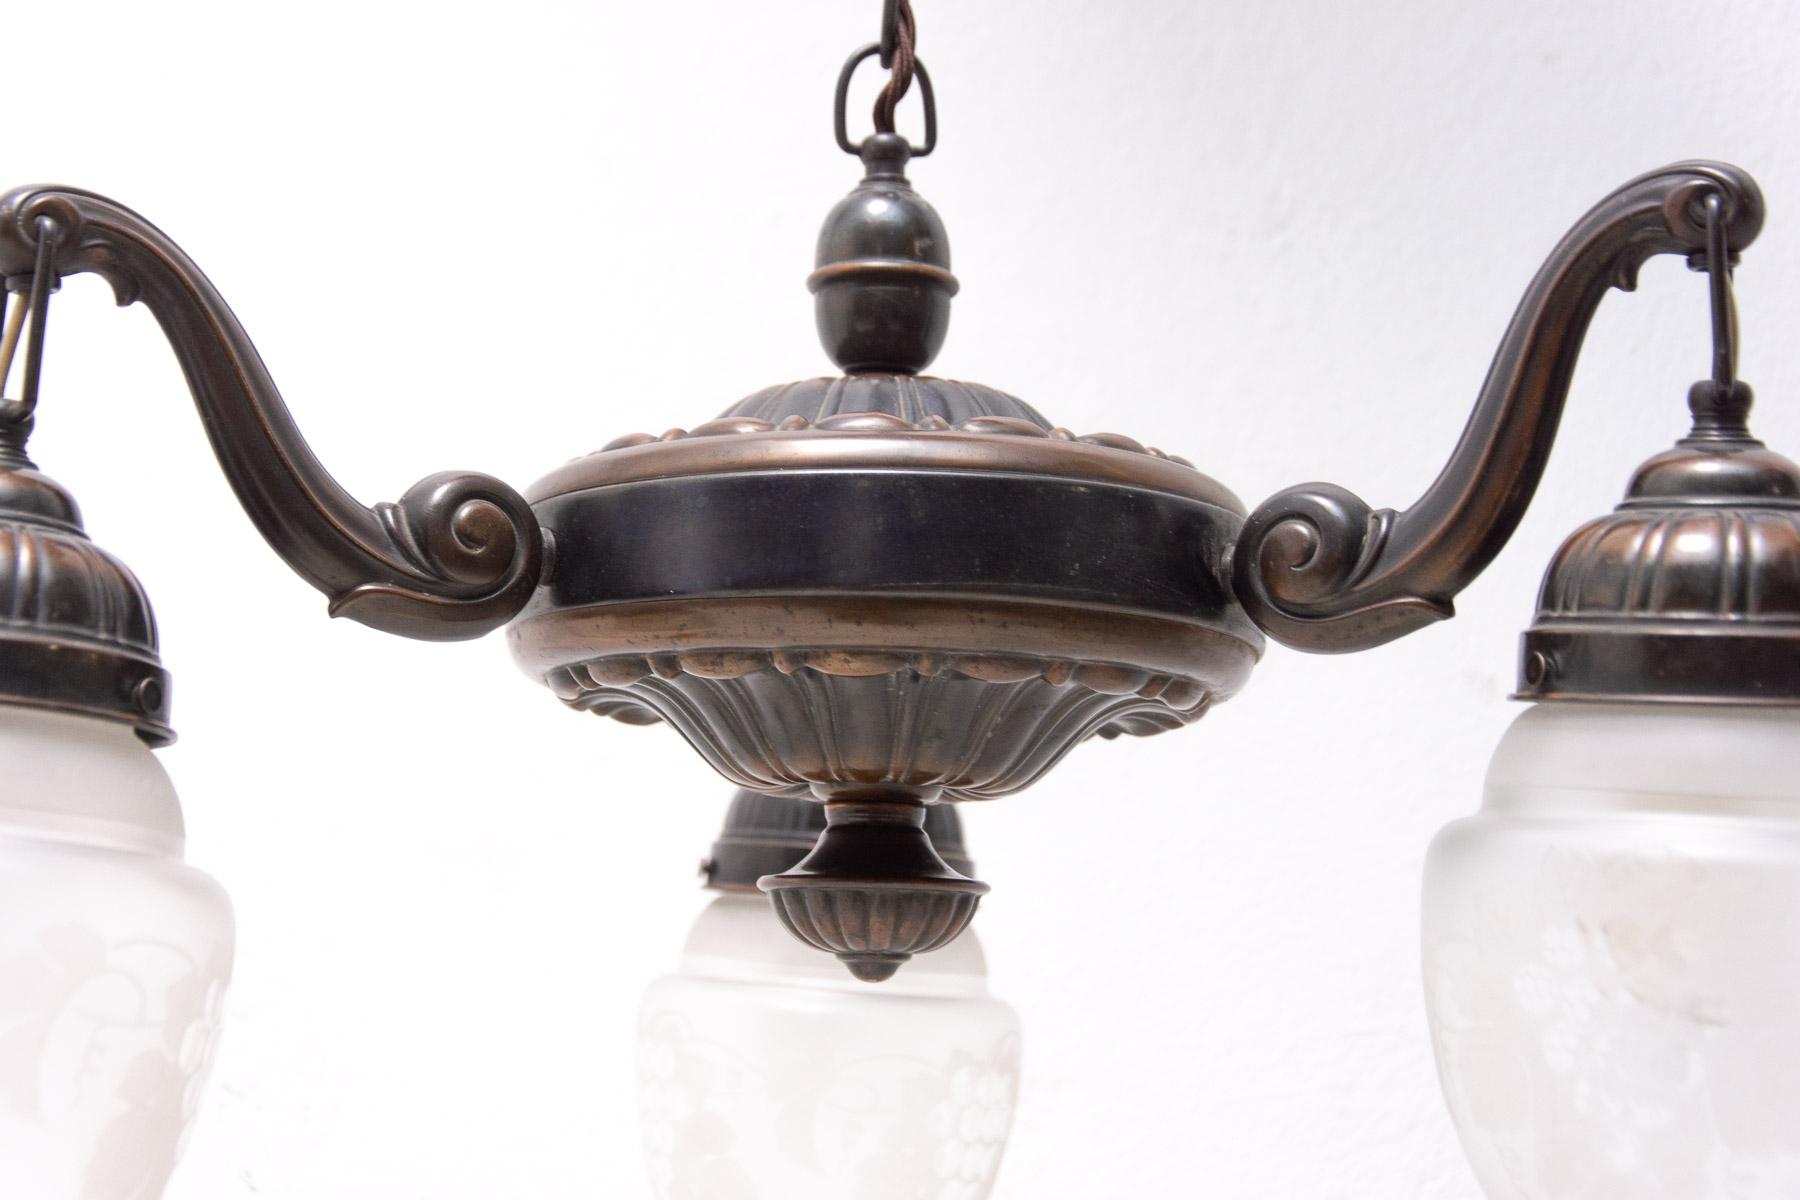 Historicizing Brass Three-Armed Chandelier, Turn of the 19th and 20th Century For Sale 4